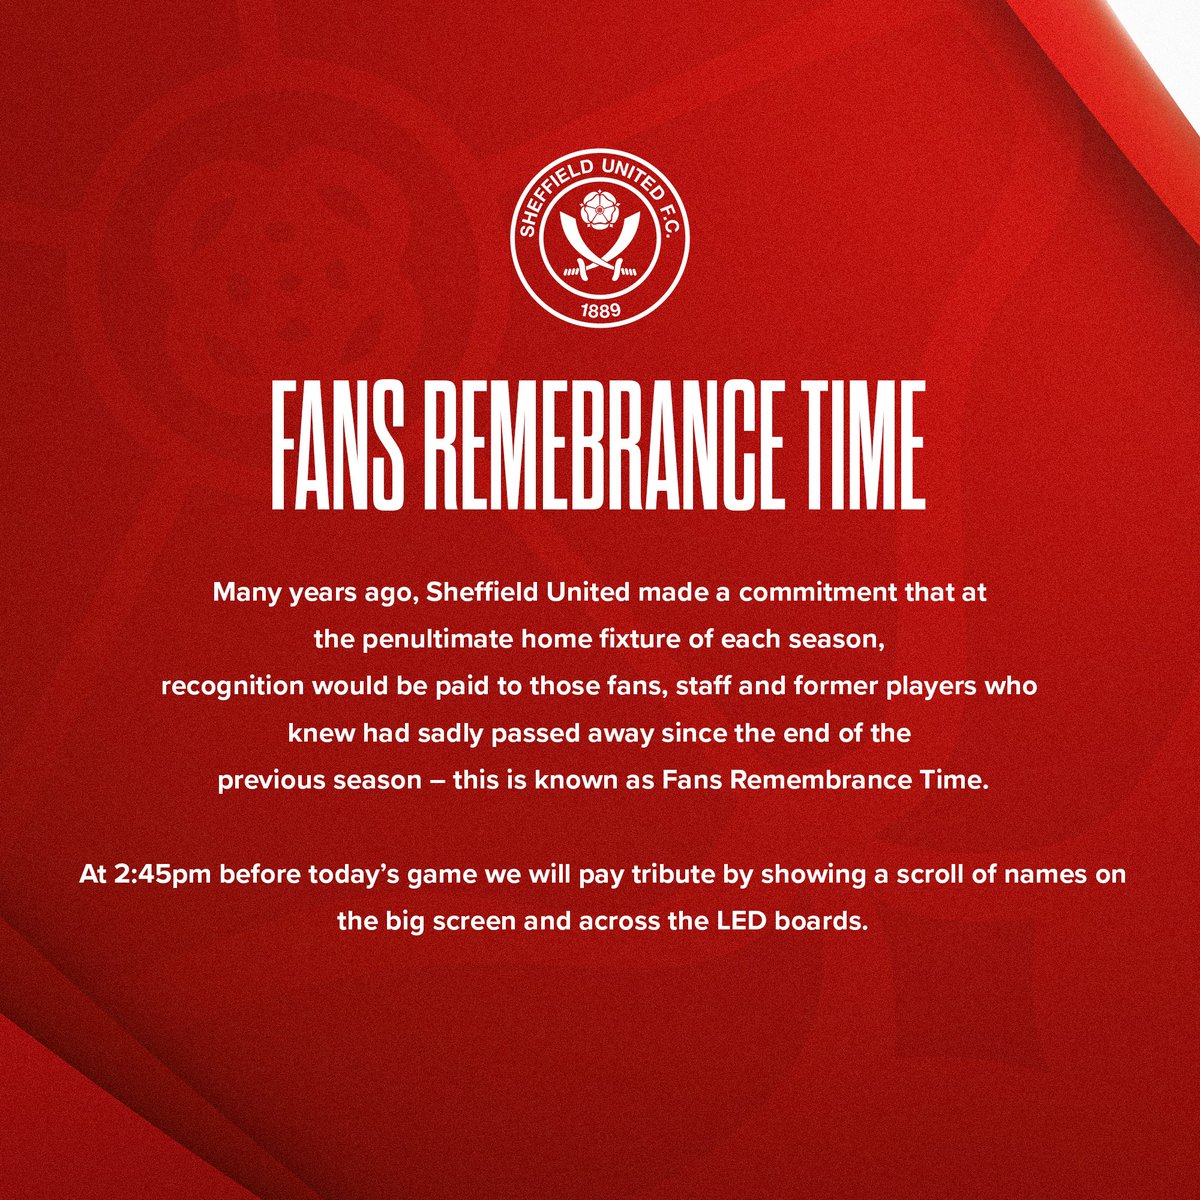 Be in your seats at 2:45 to partake in today’s Fans Remembrance Time.